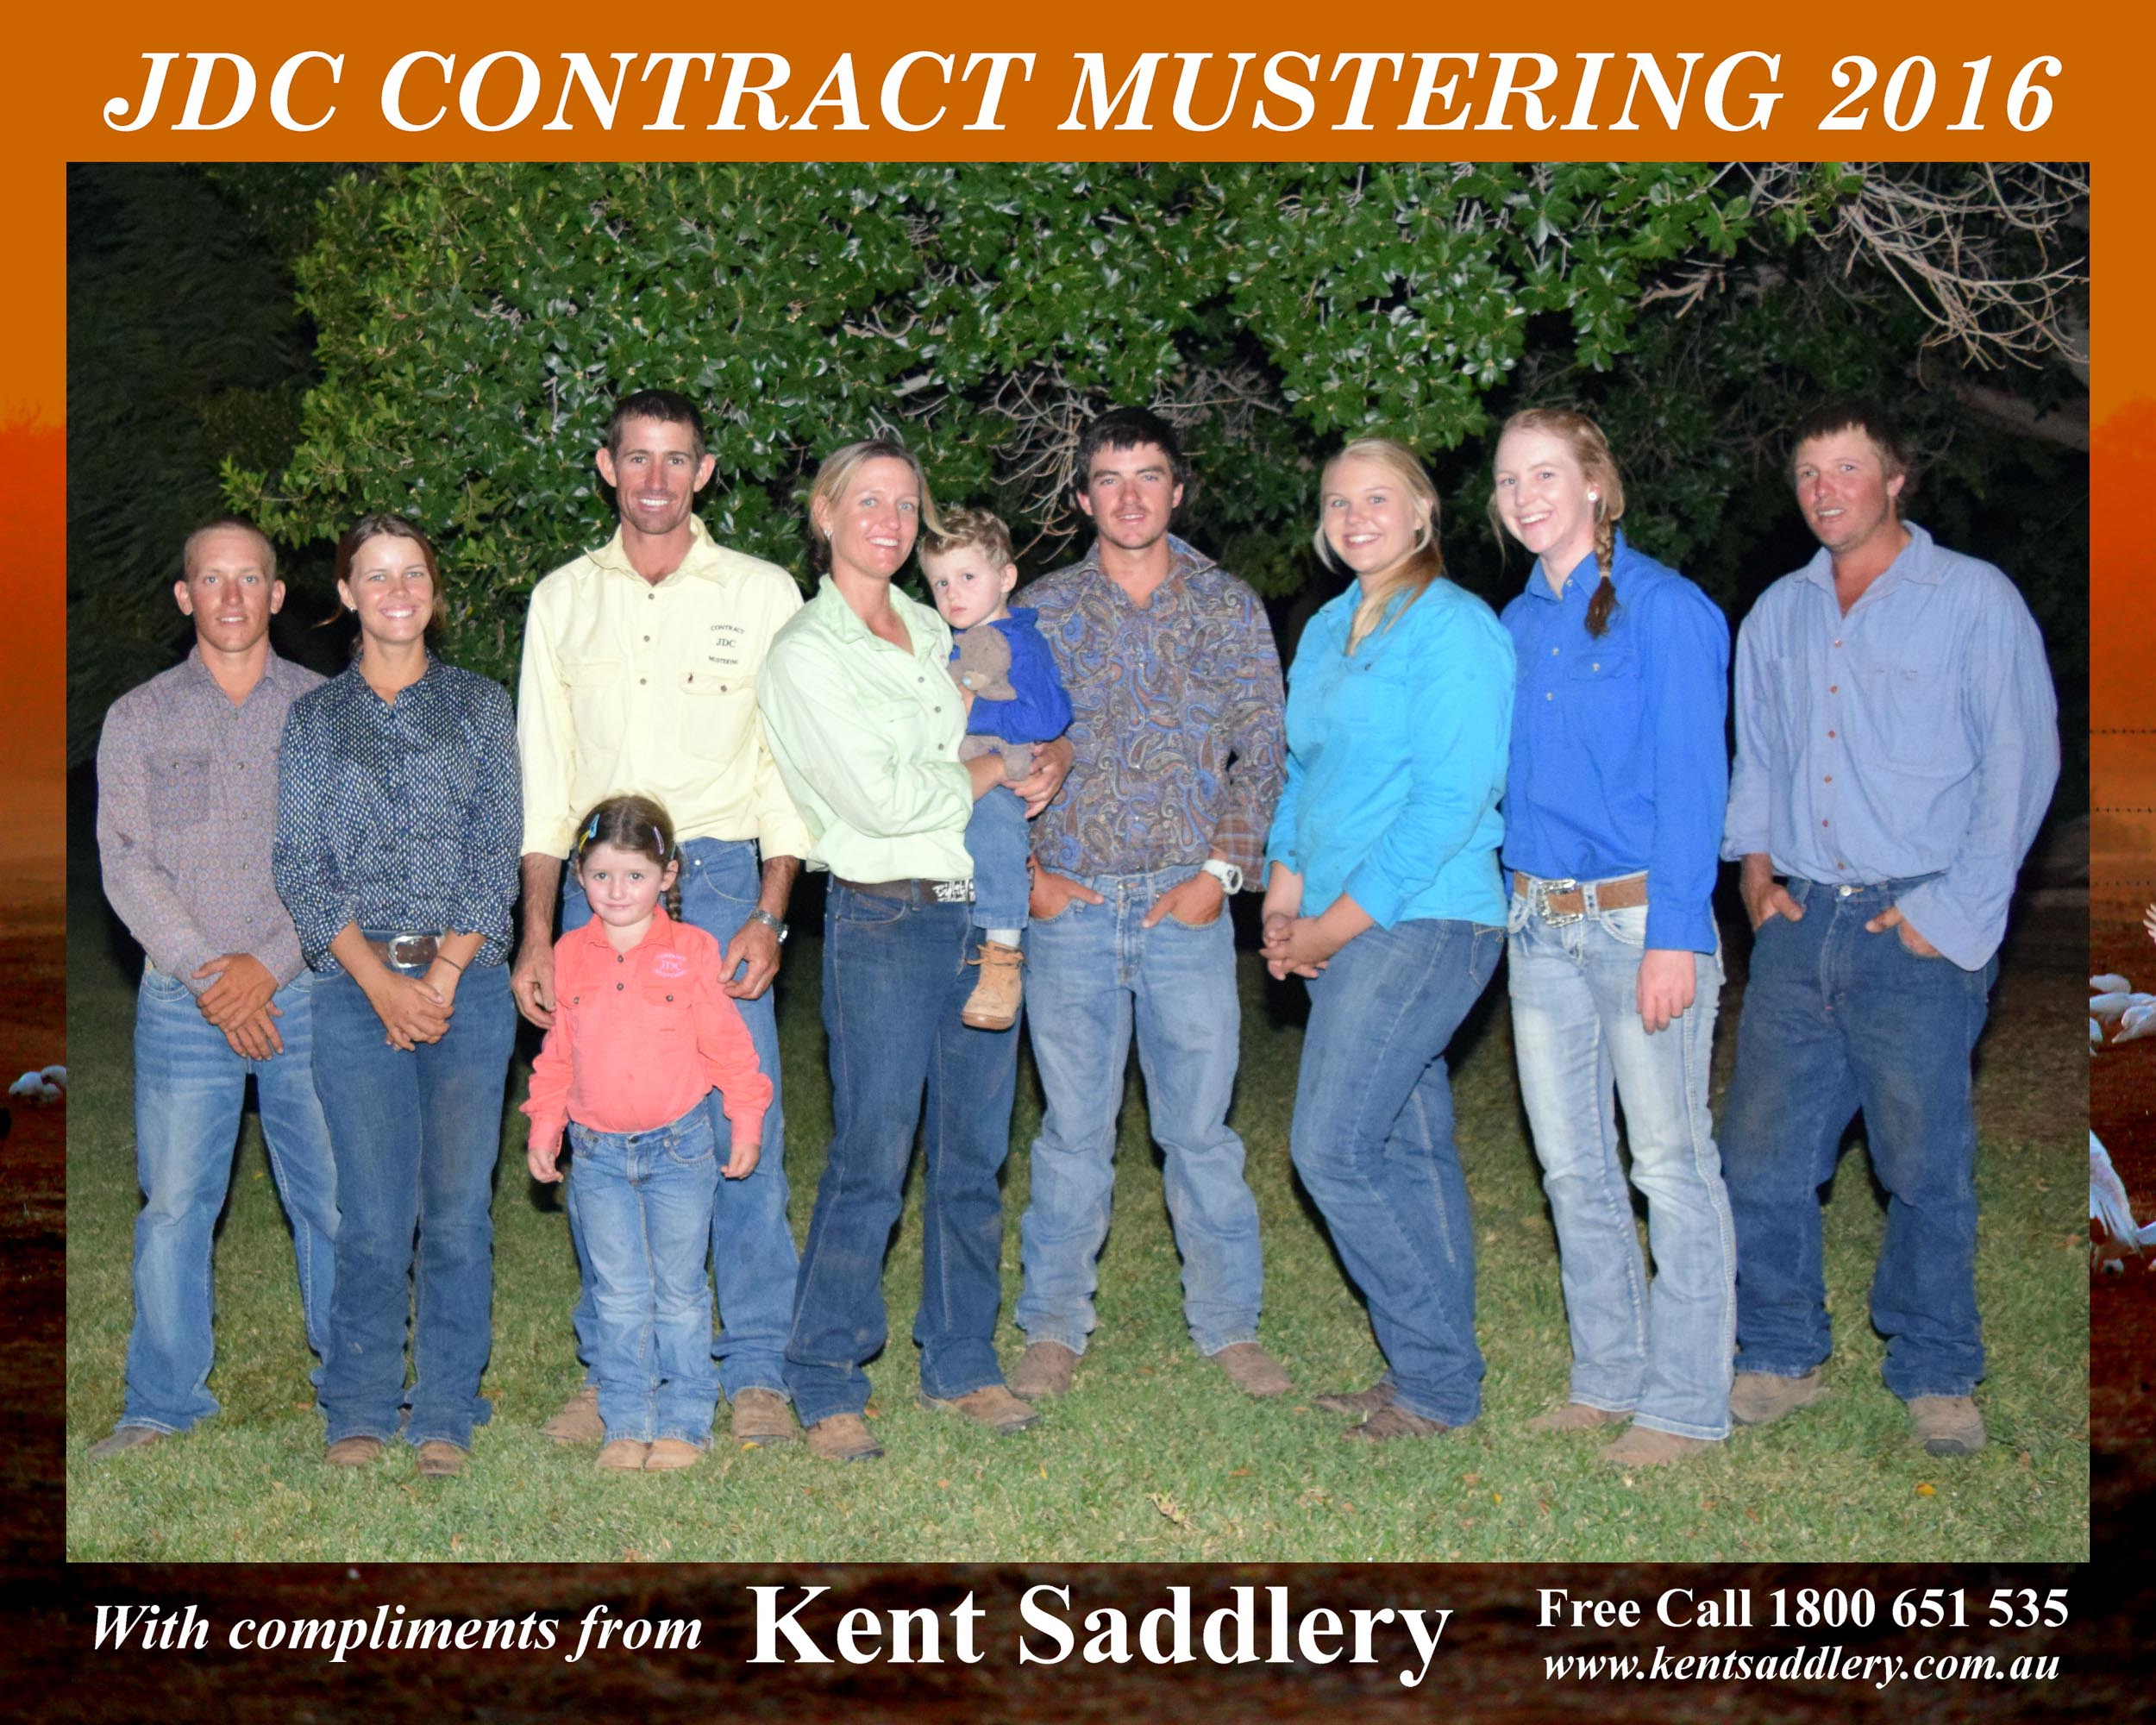 Drovers & Contractors - JDC Contract Mustering 2